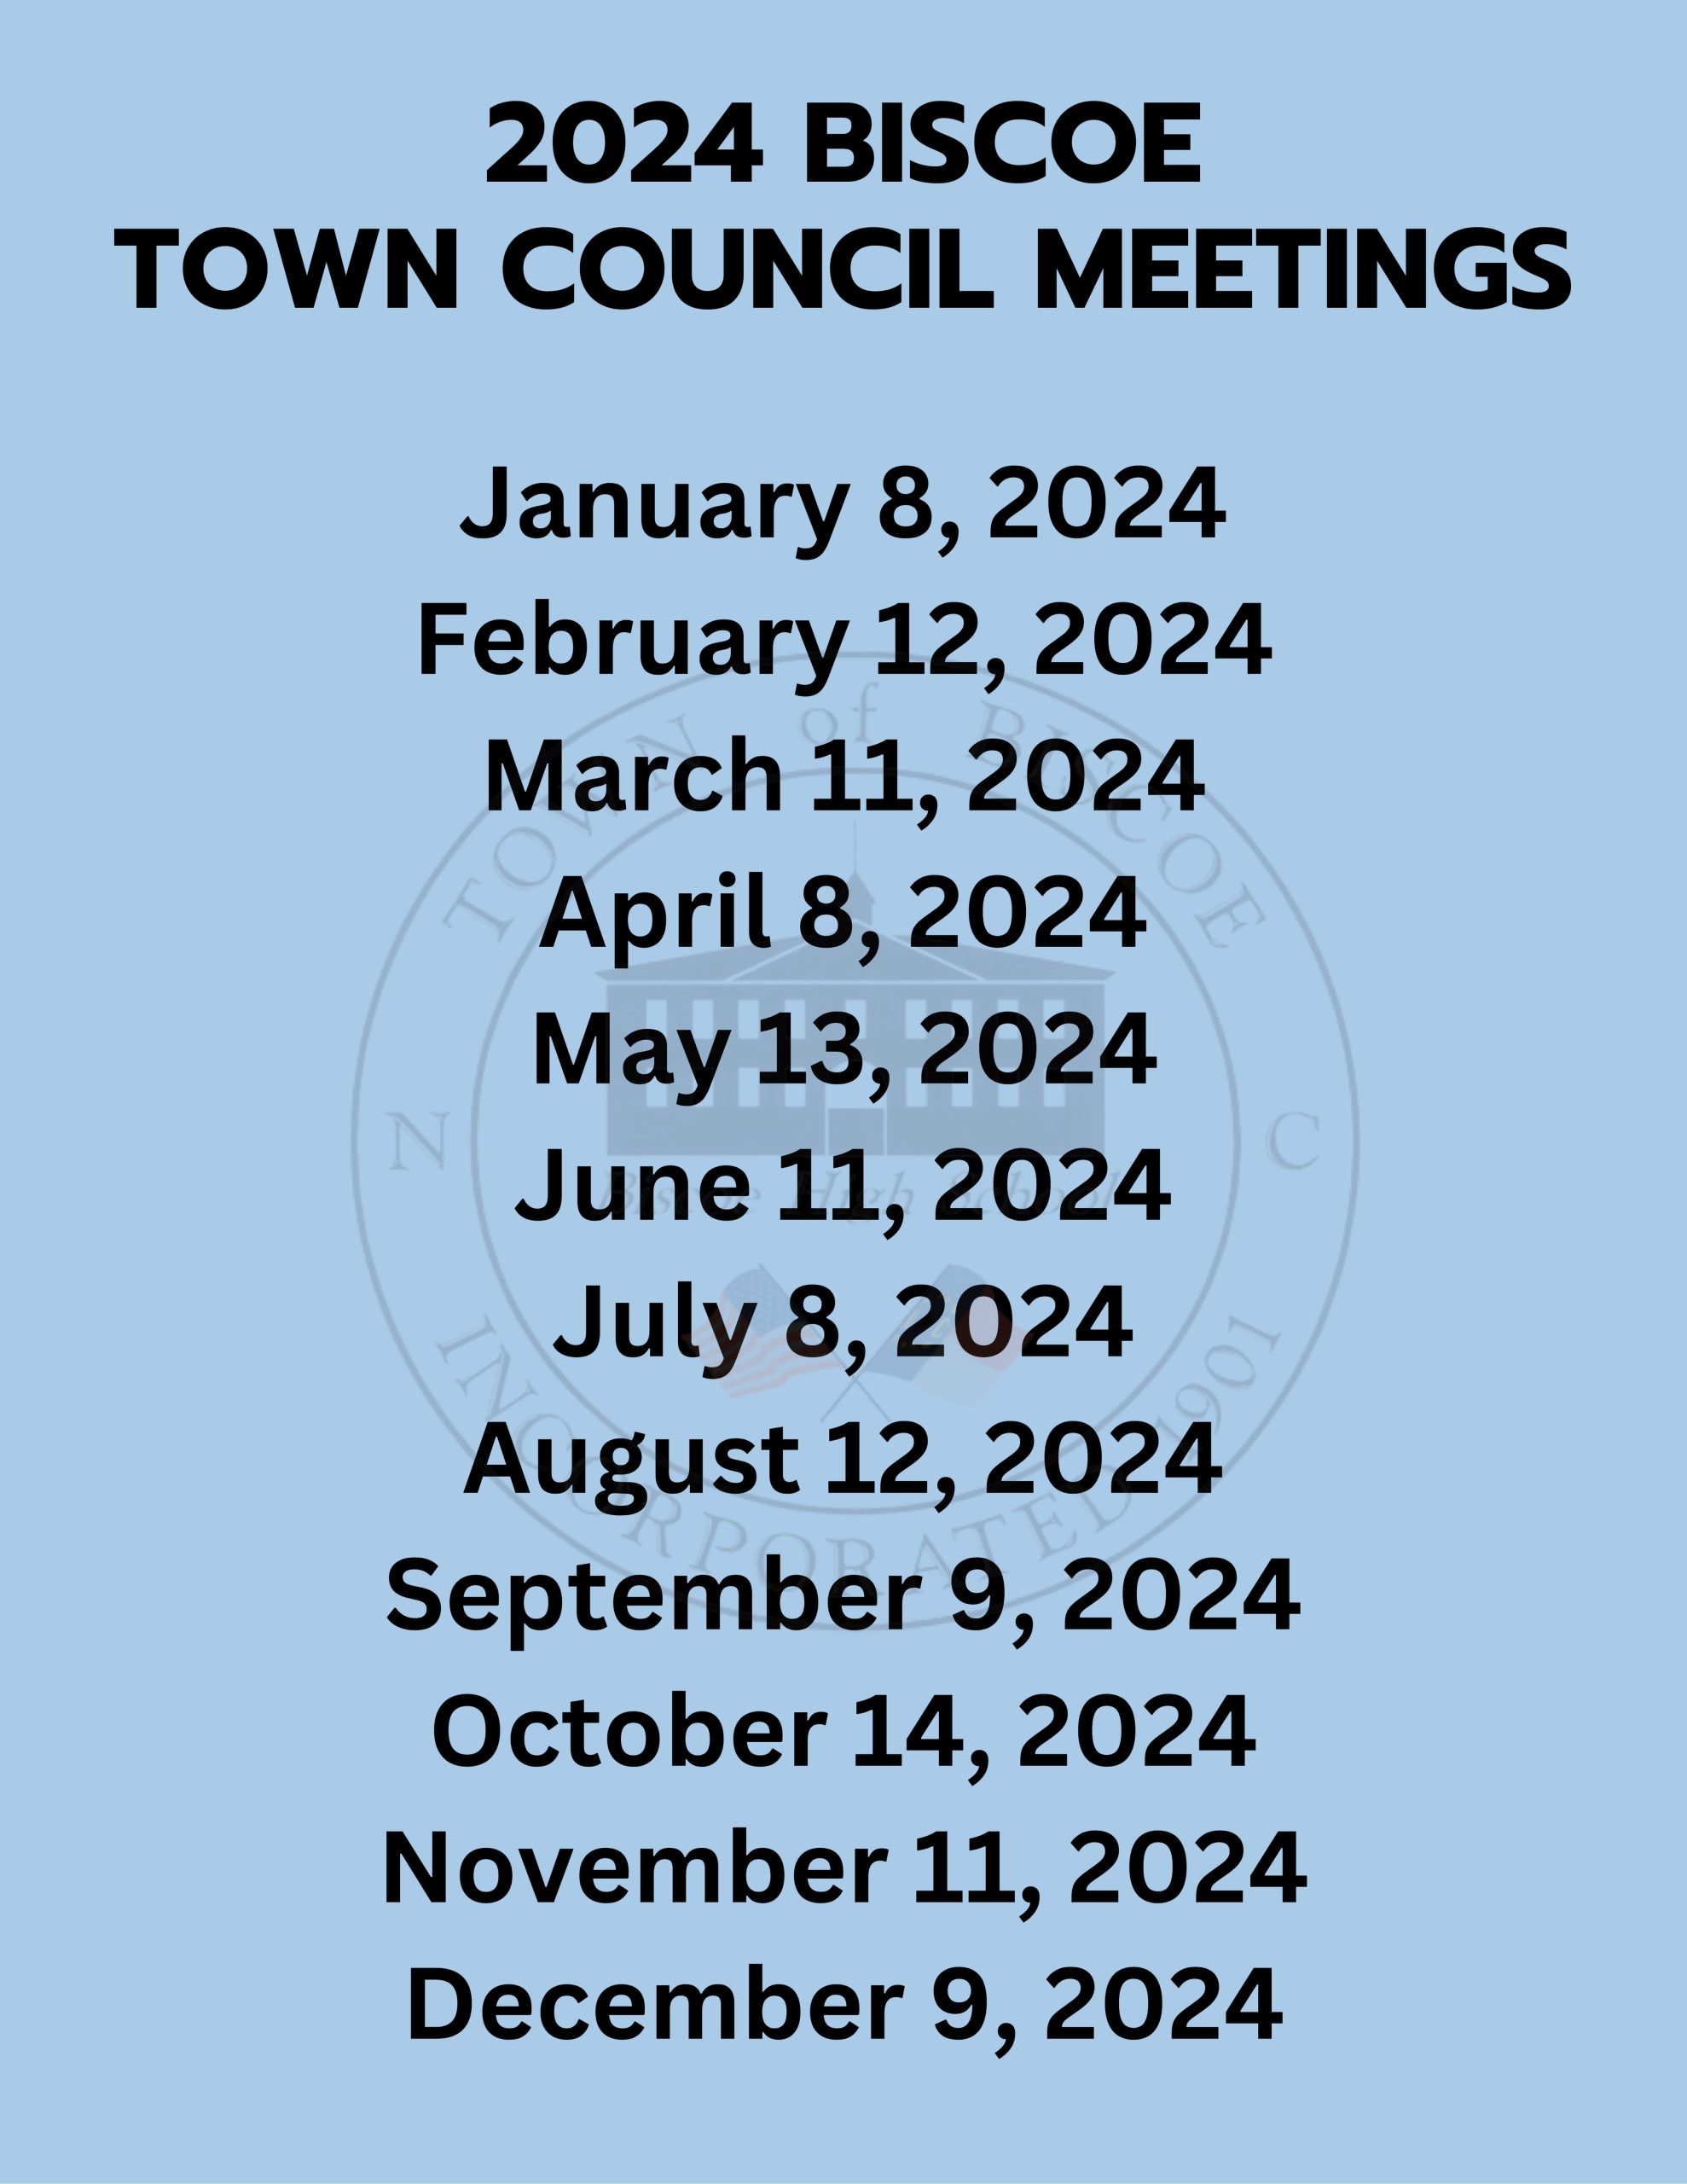 2024 Biscoe Town Council Meetings